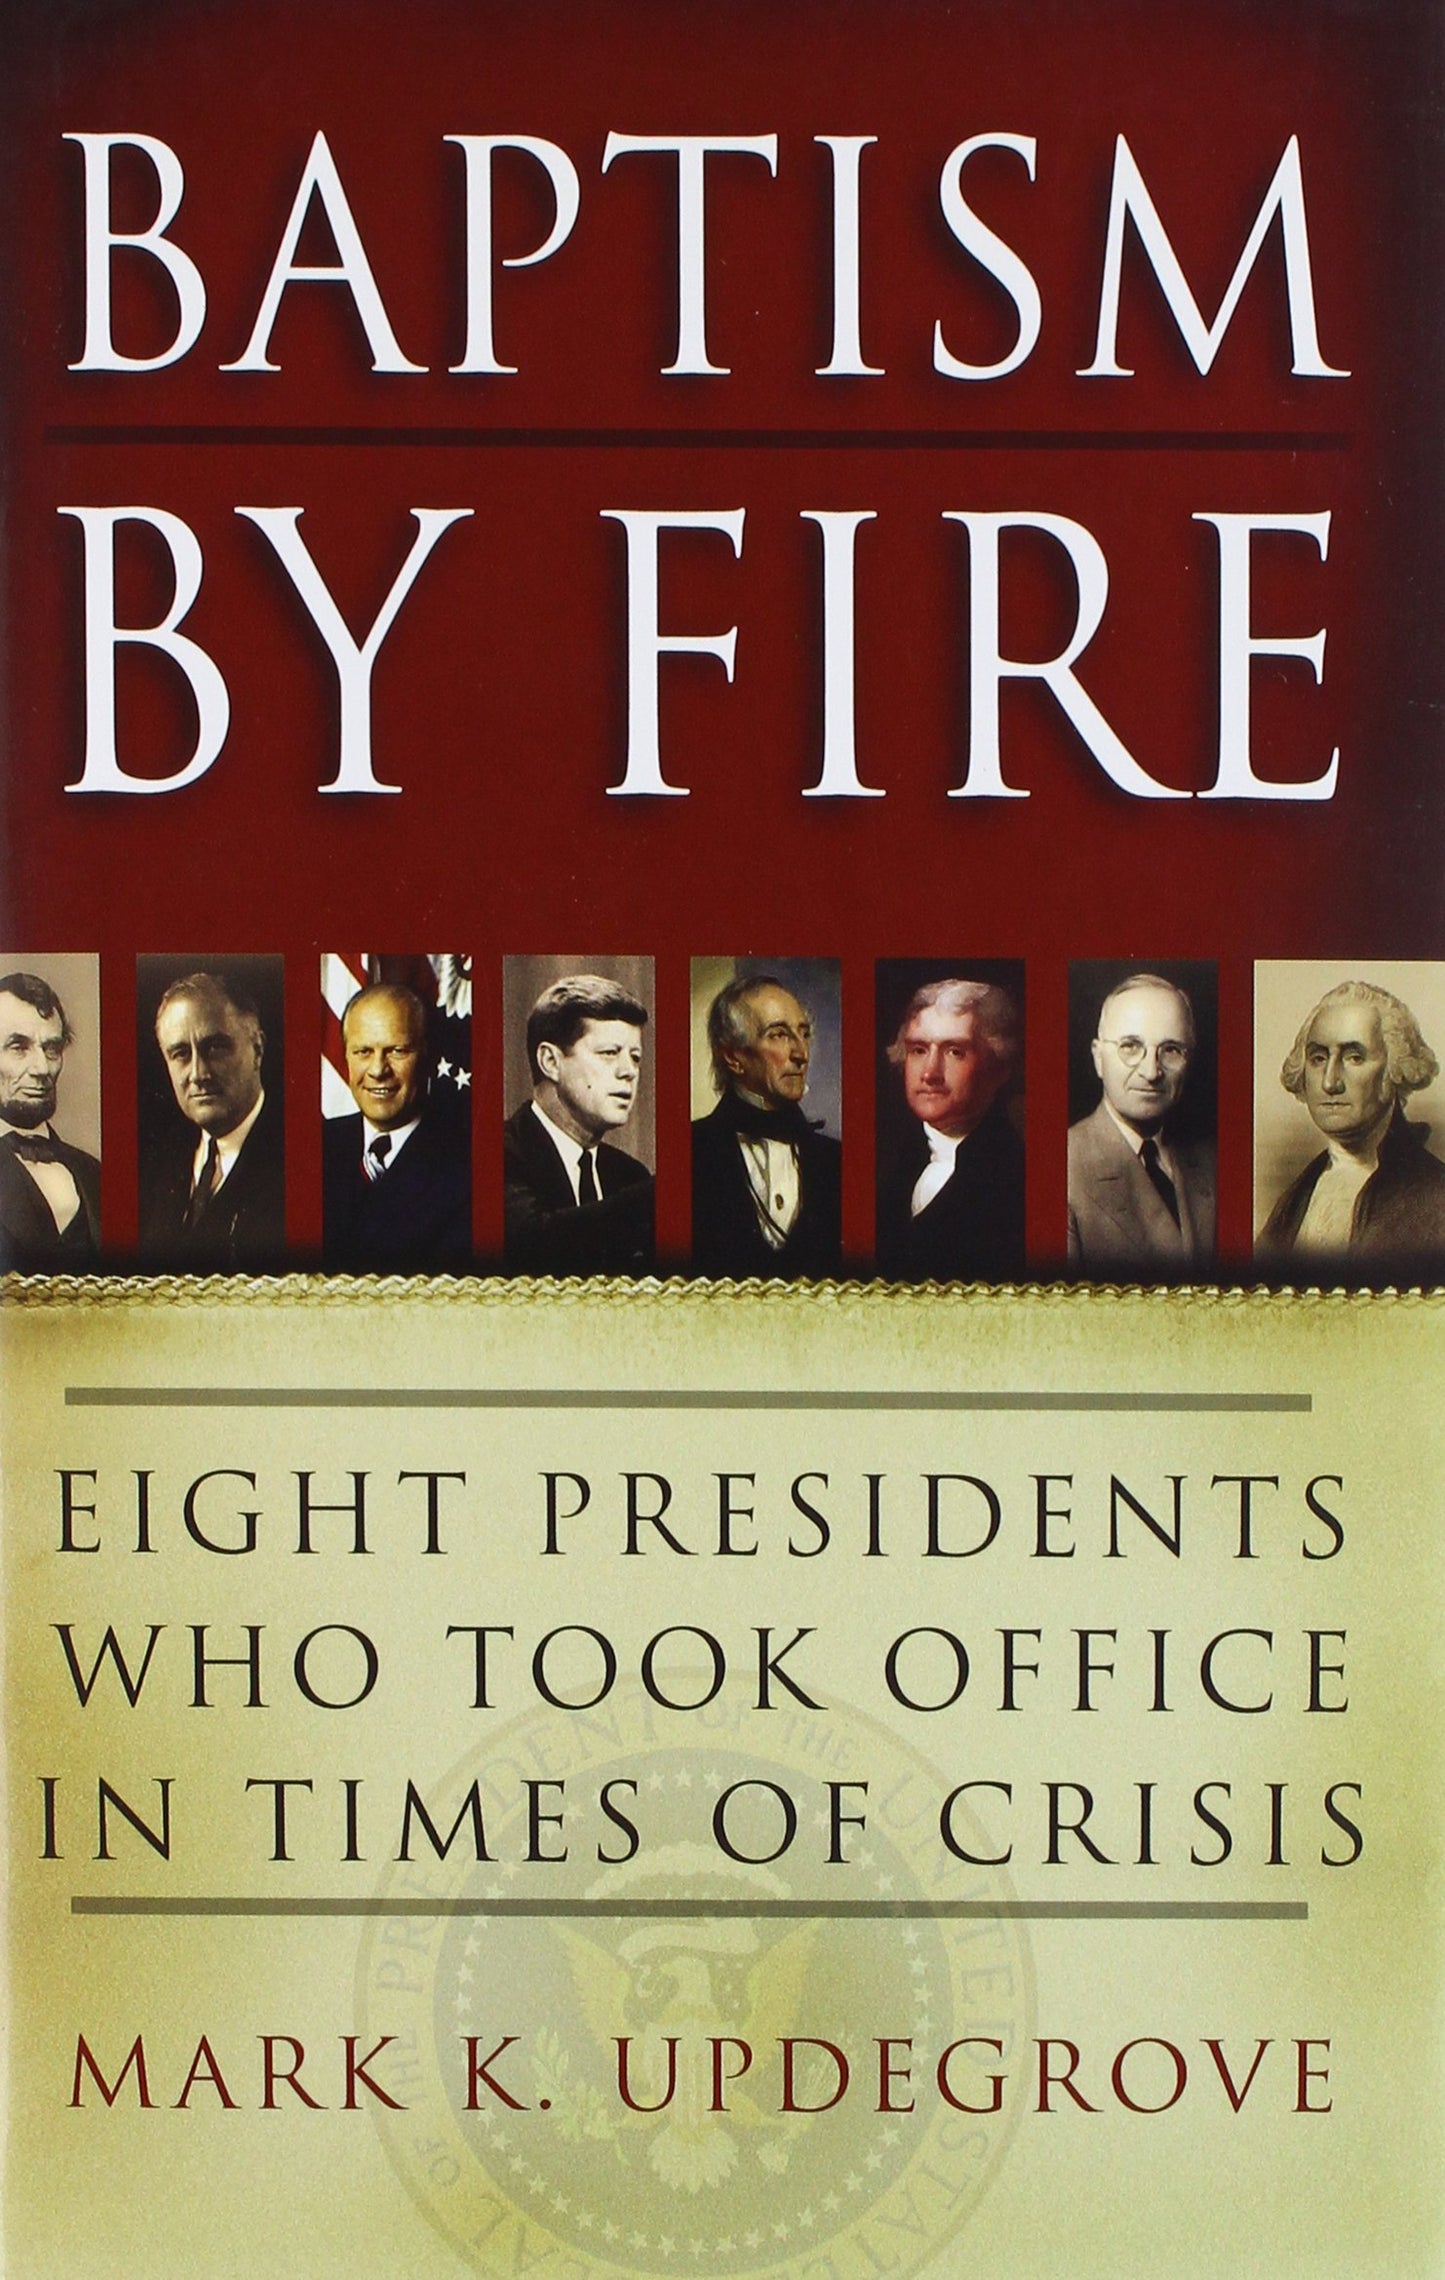 Baptism by Fire: Eight Presidents Who Took Office in Times of Crisis